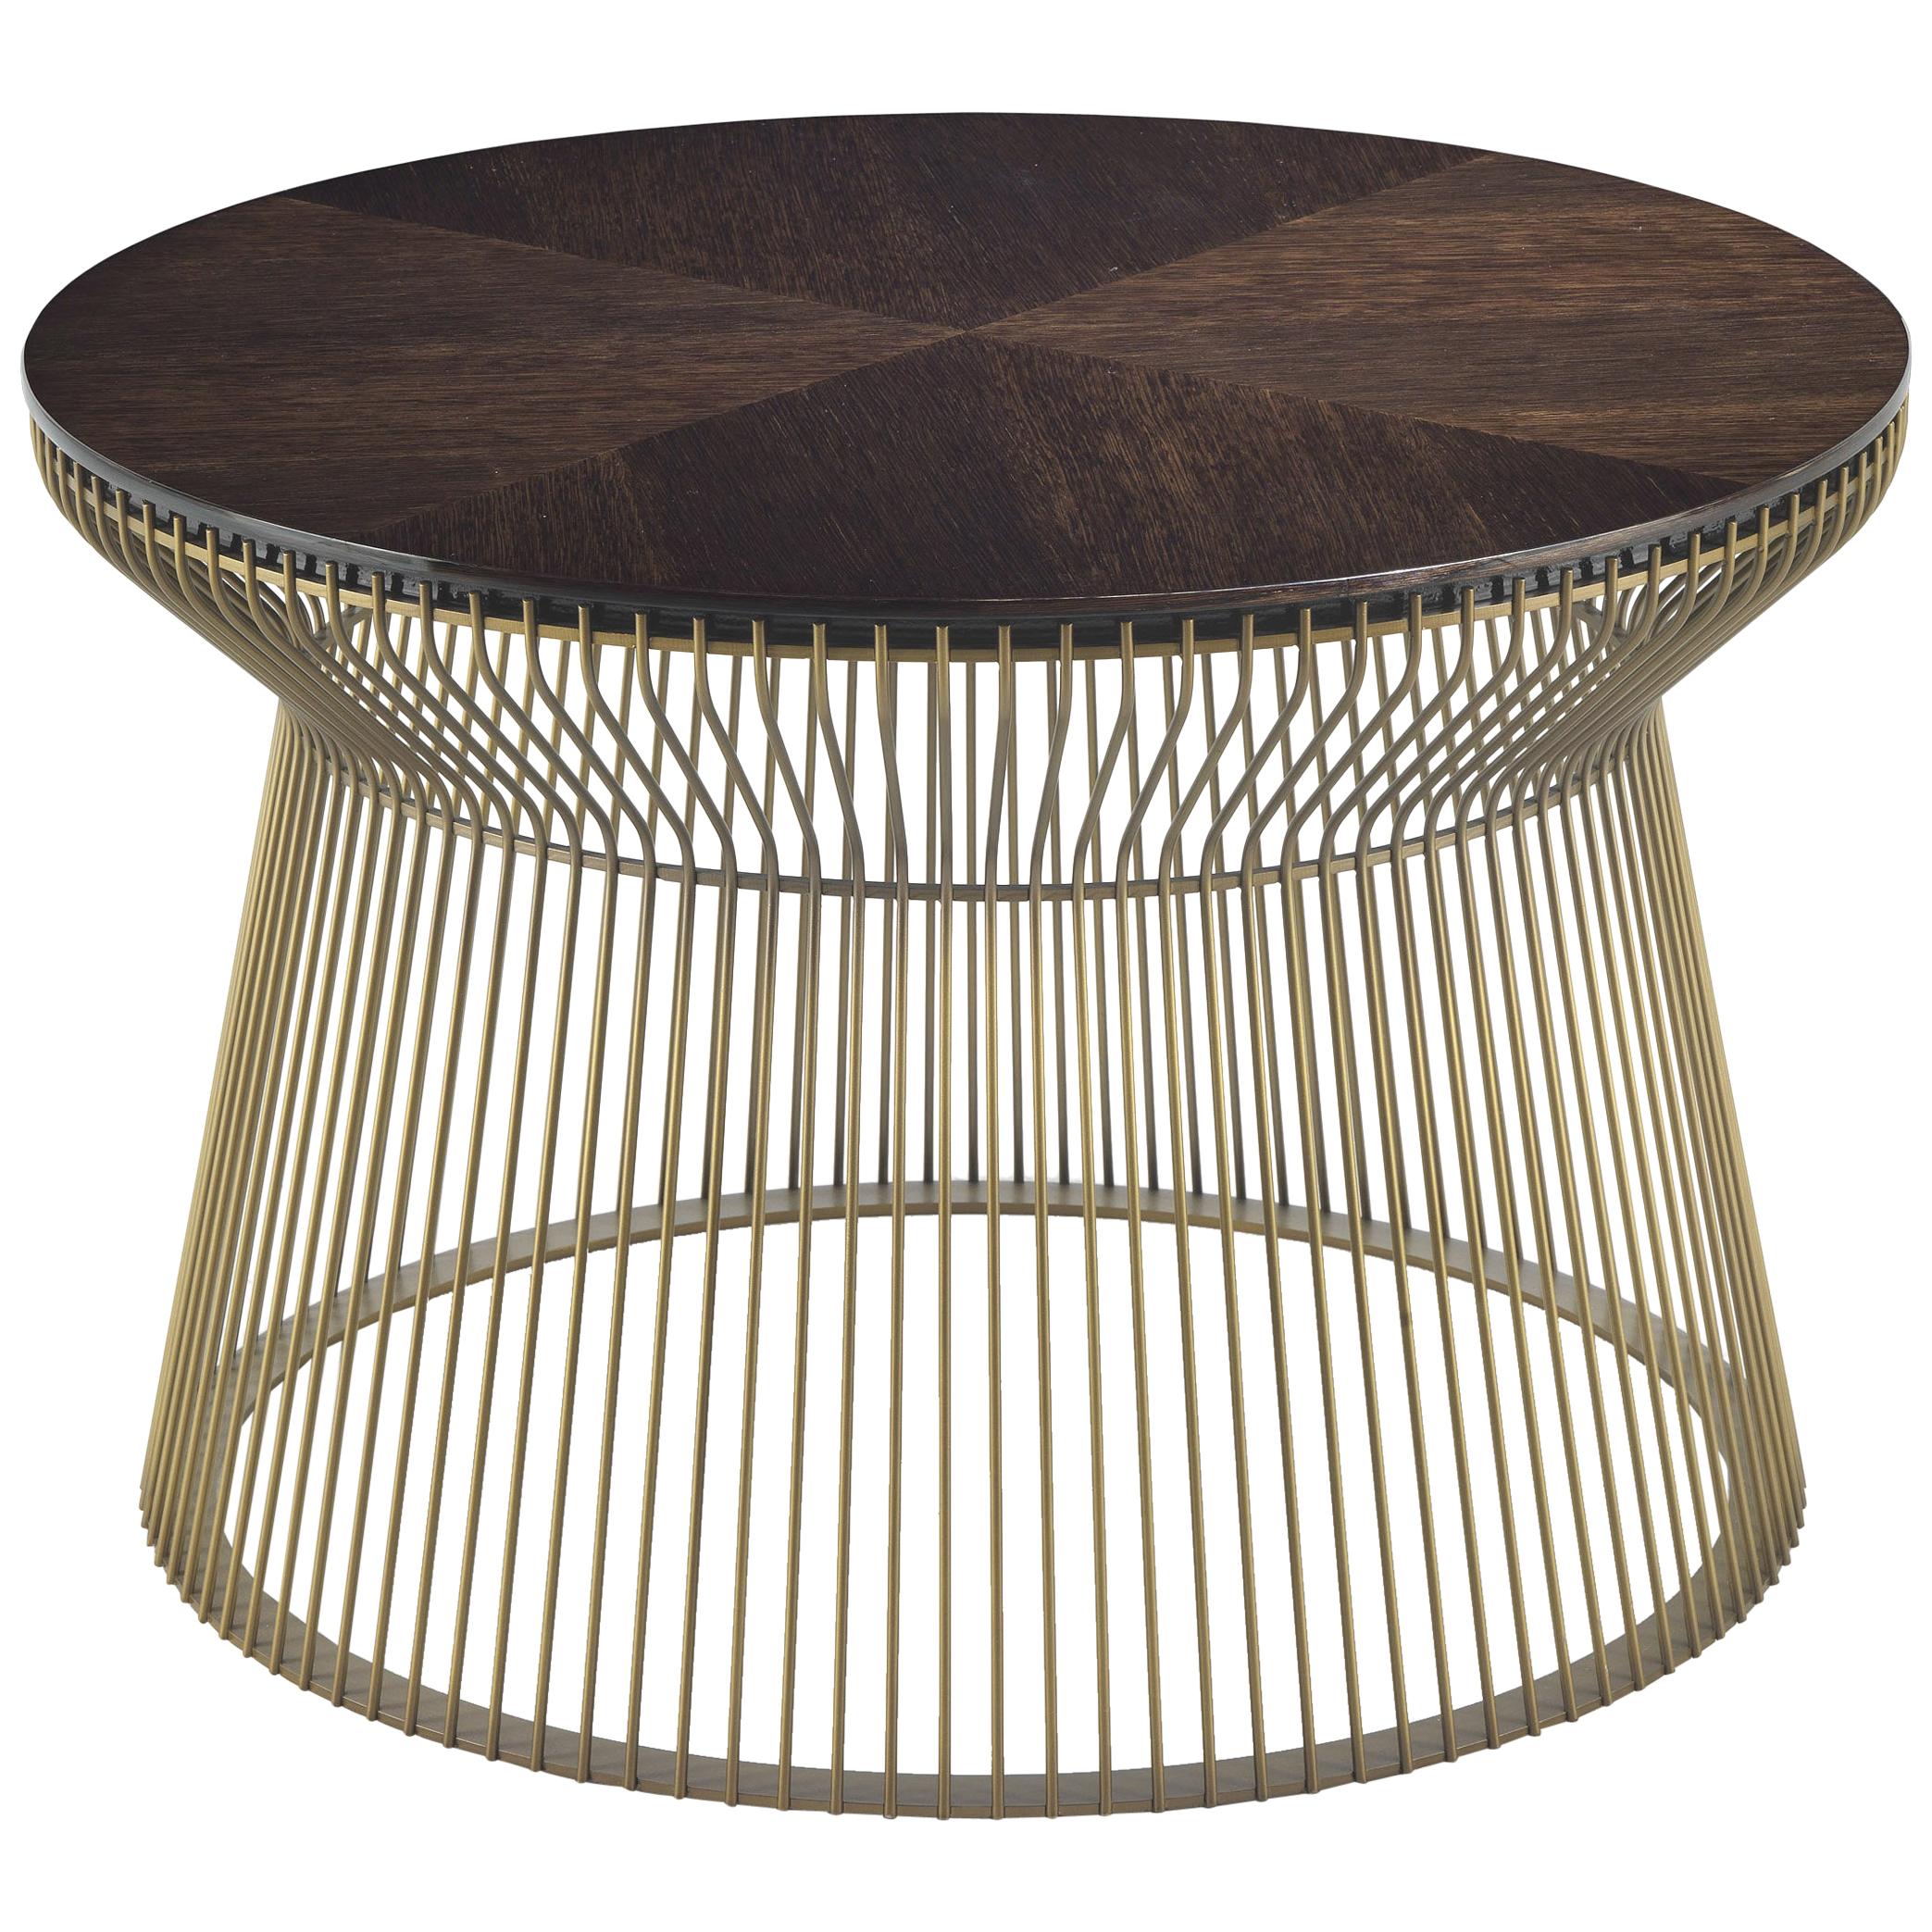 Roberto Cavalli Home Interiors Wire.2 Side Table with Wooden Top